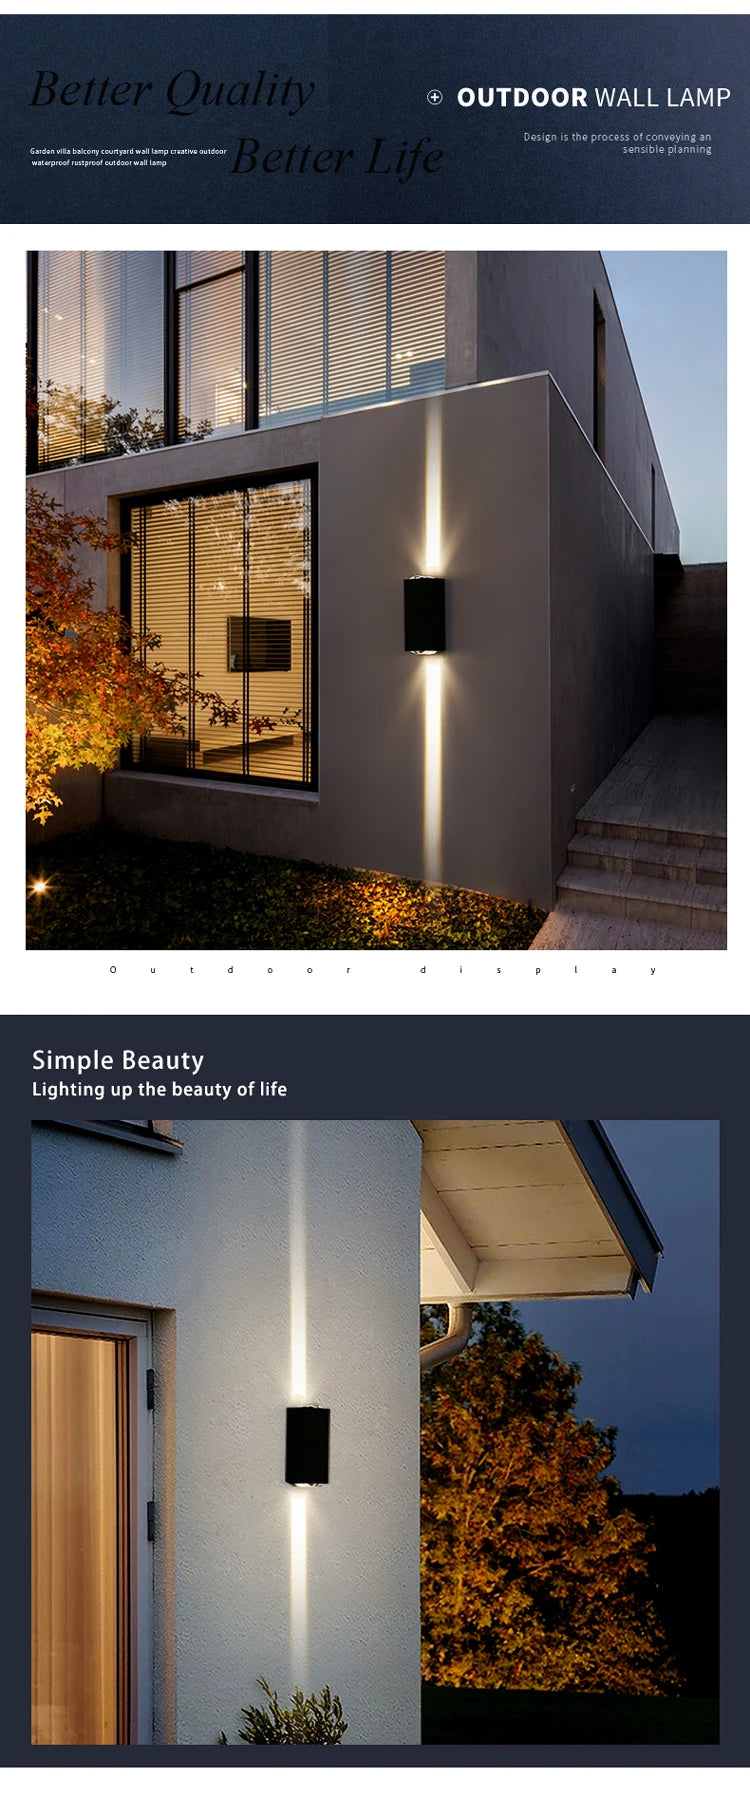 JoollySun Wall Sconces Outdoor Wall Light, Elegant outdoor lamp design for porches/balconies featuring weather-resistant and energy-efficient LED lighting.